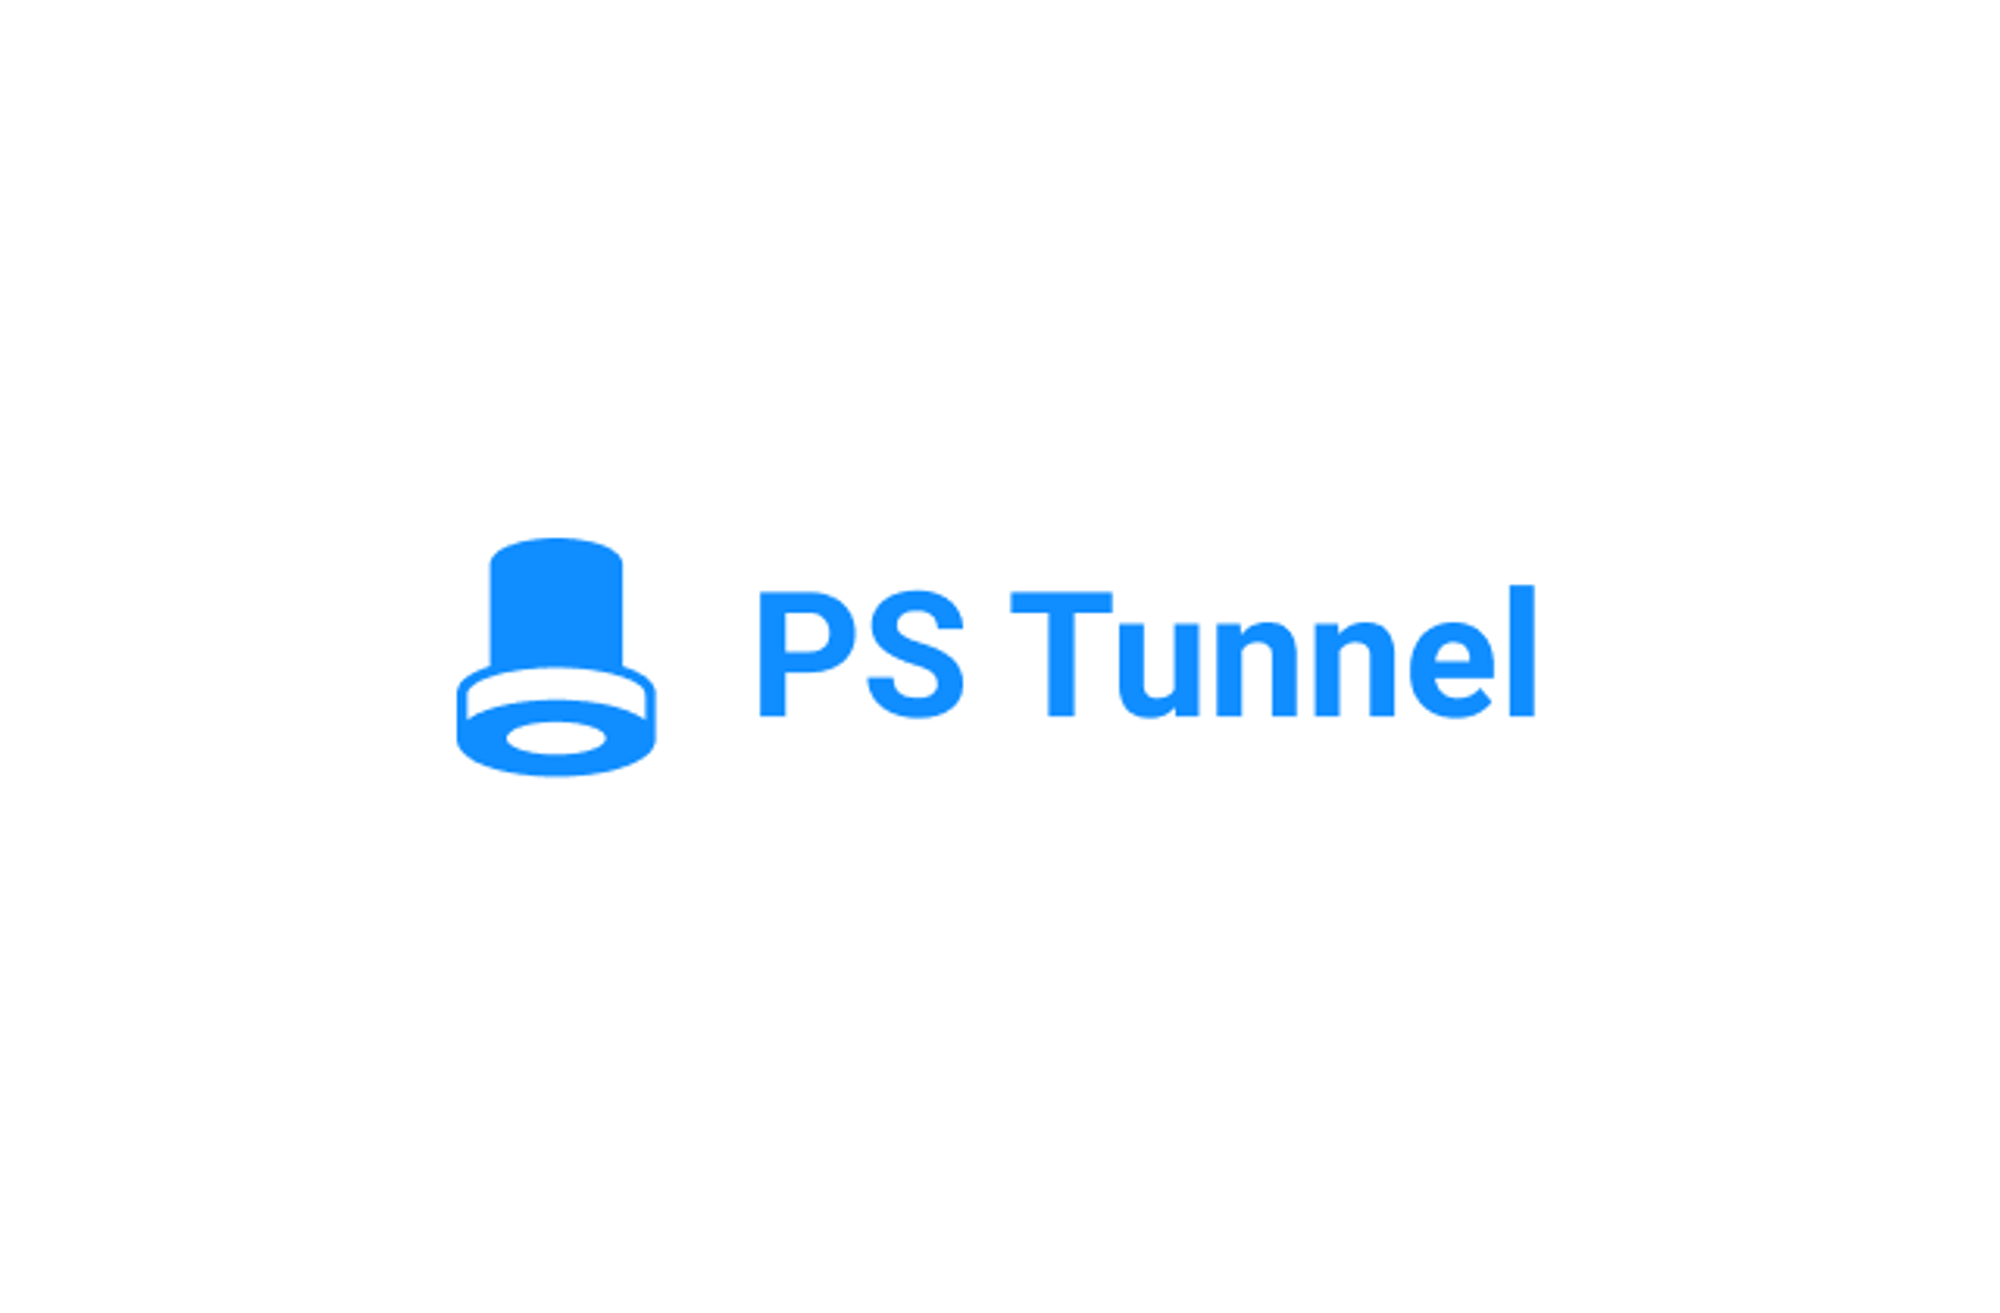 PS Tunnel